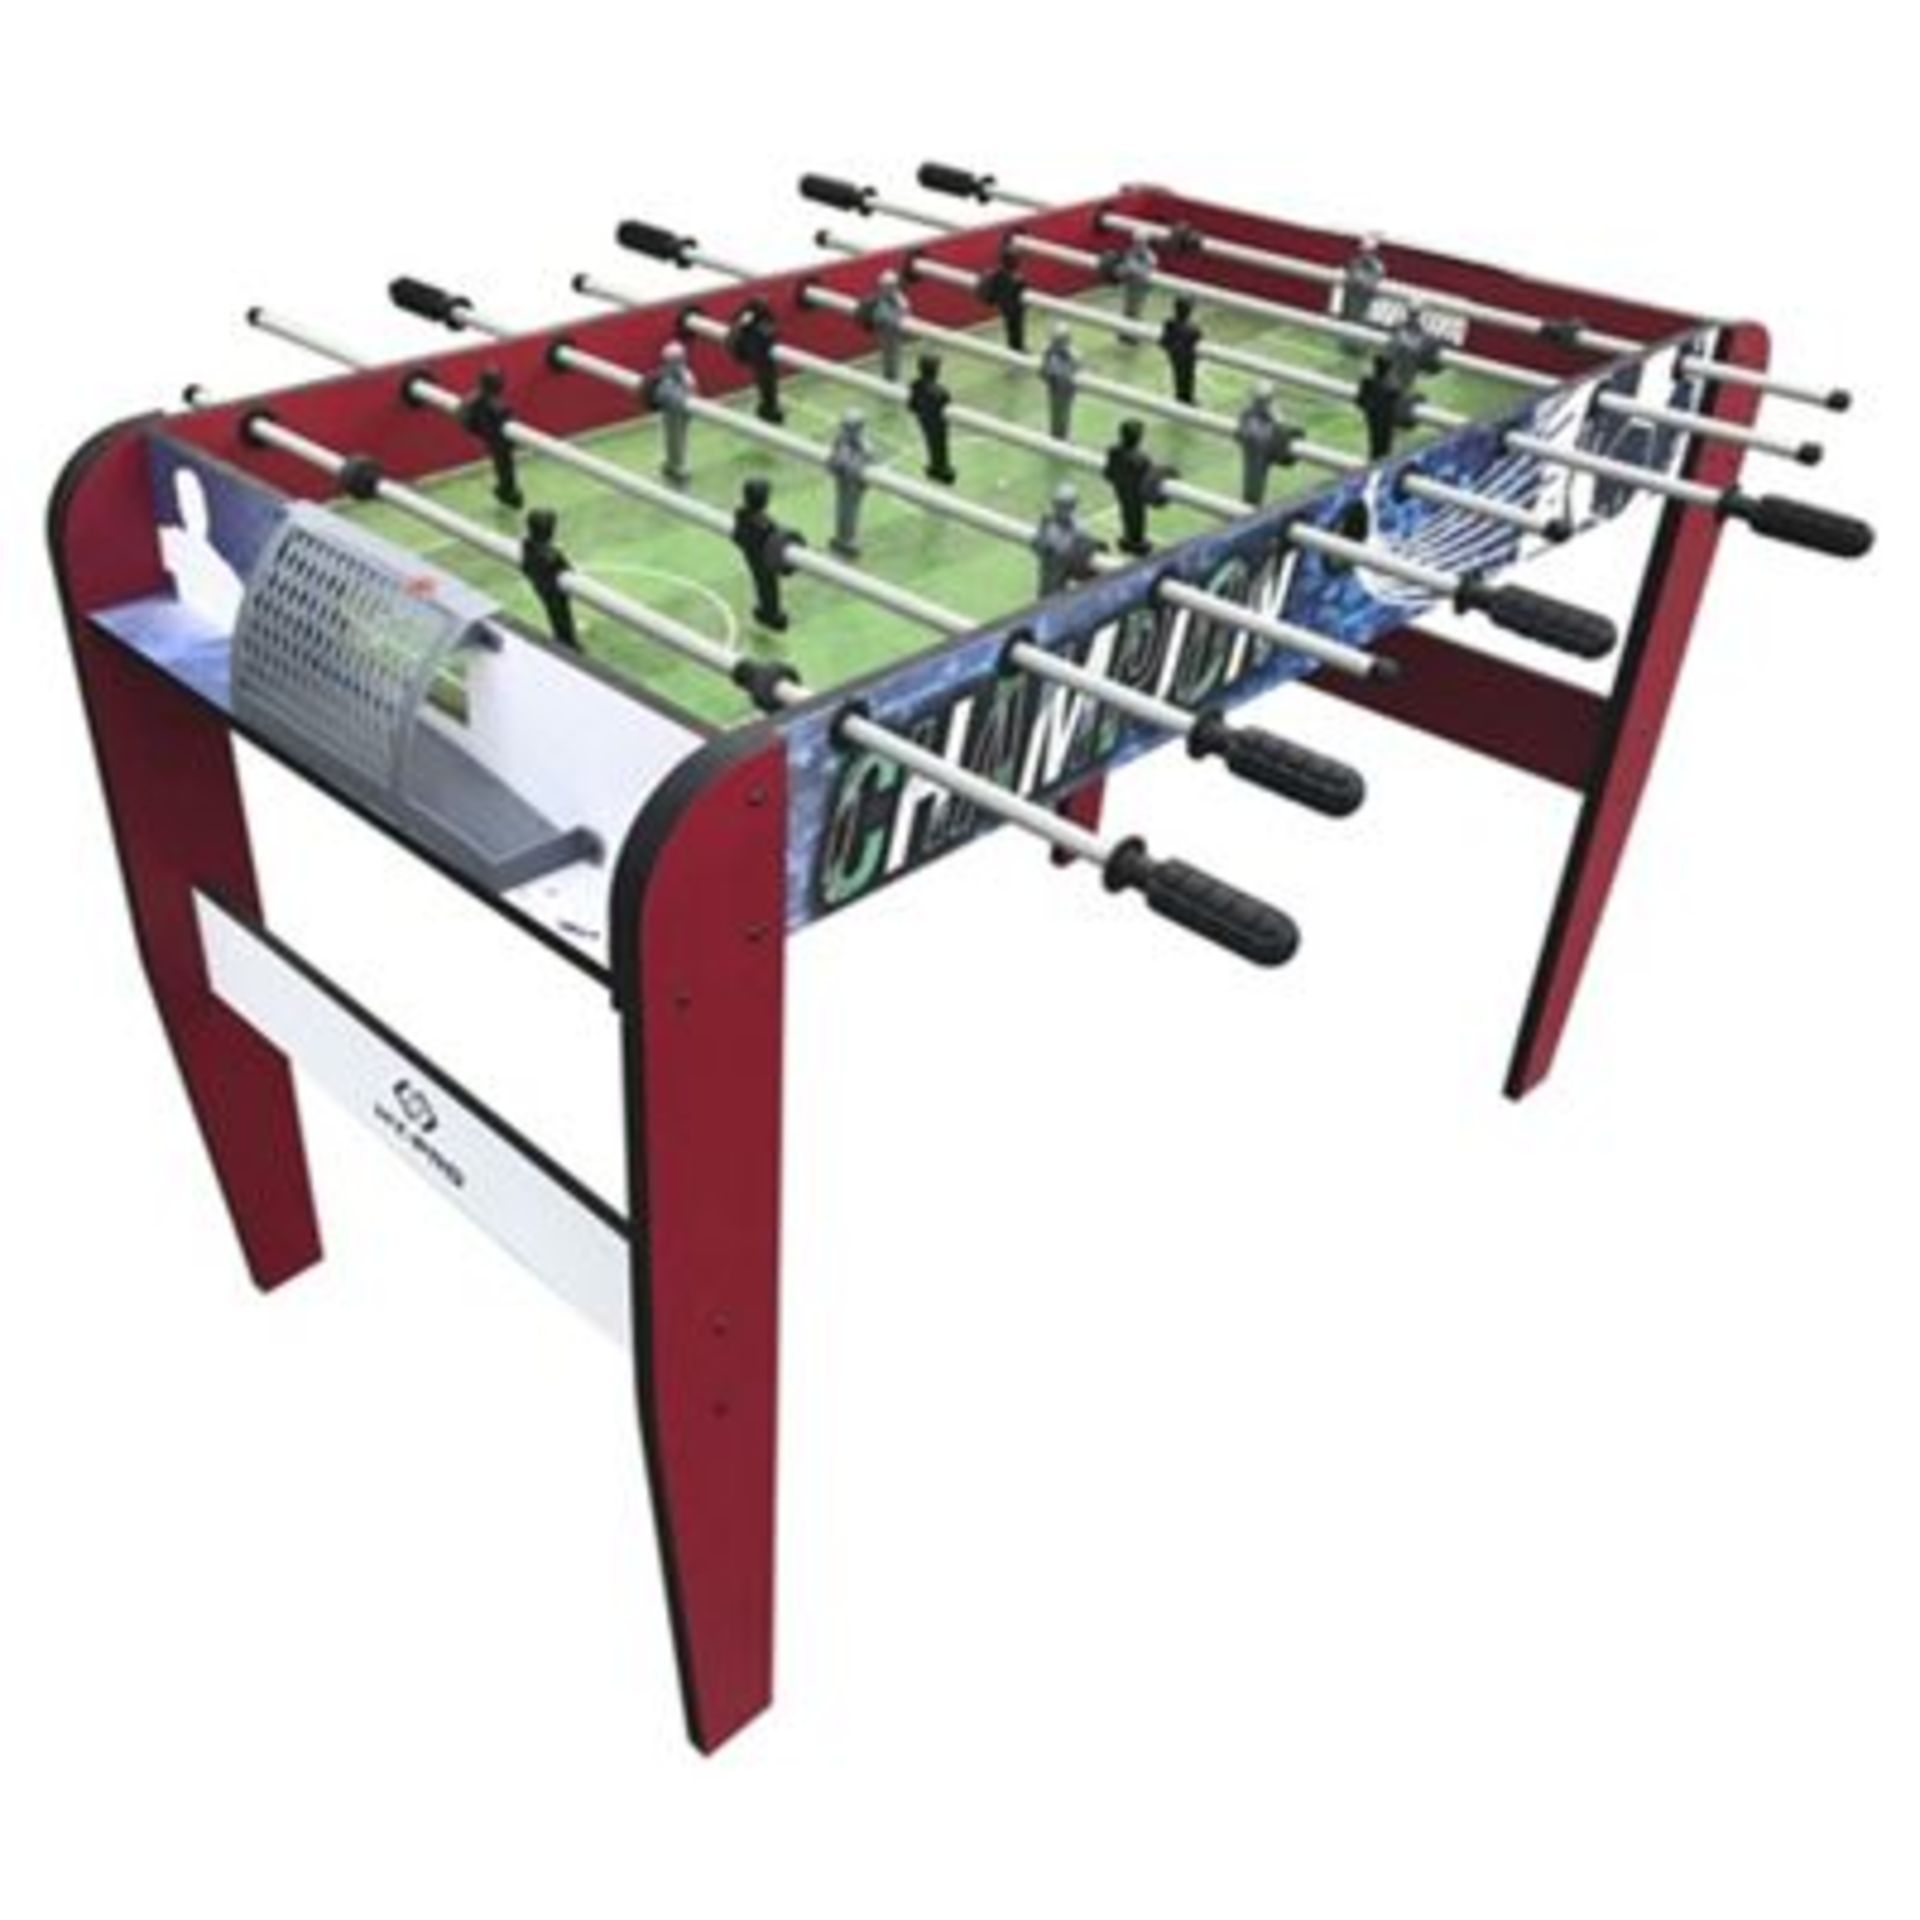 V Brand New HY-PRO 4ft Football Table - 2 Balls - 9 A-Side - 2 x Scoreboards - Online Price £49.